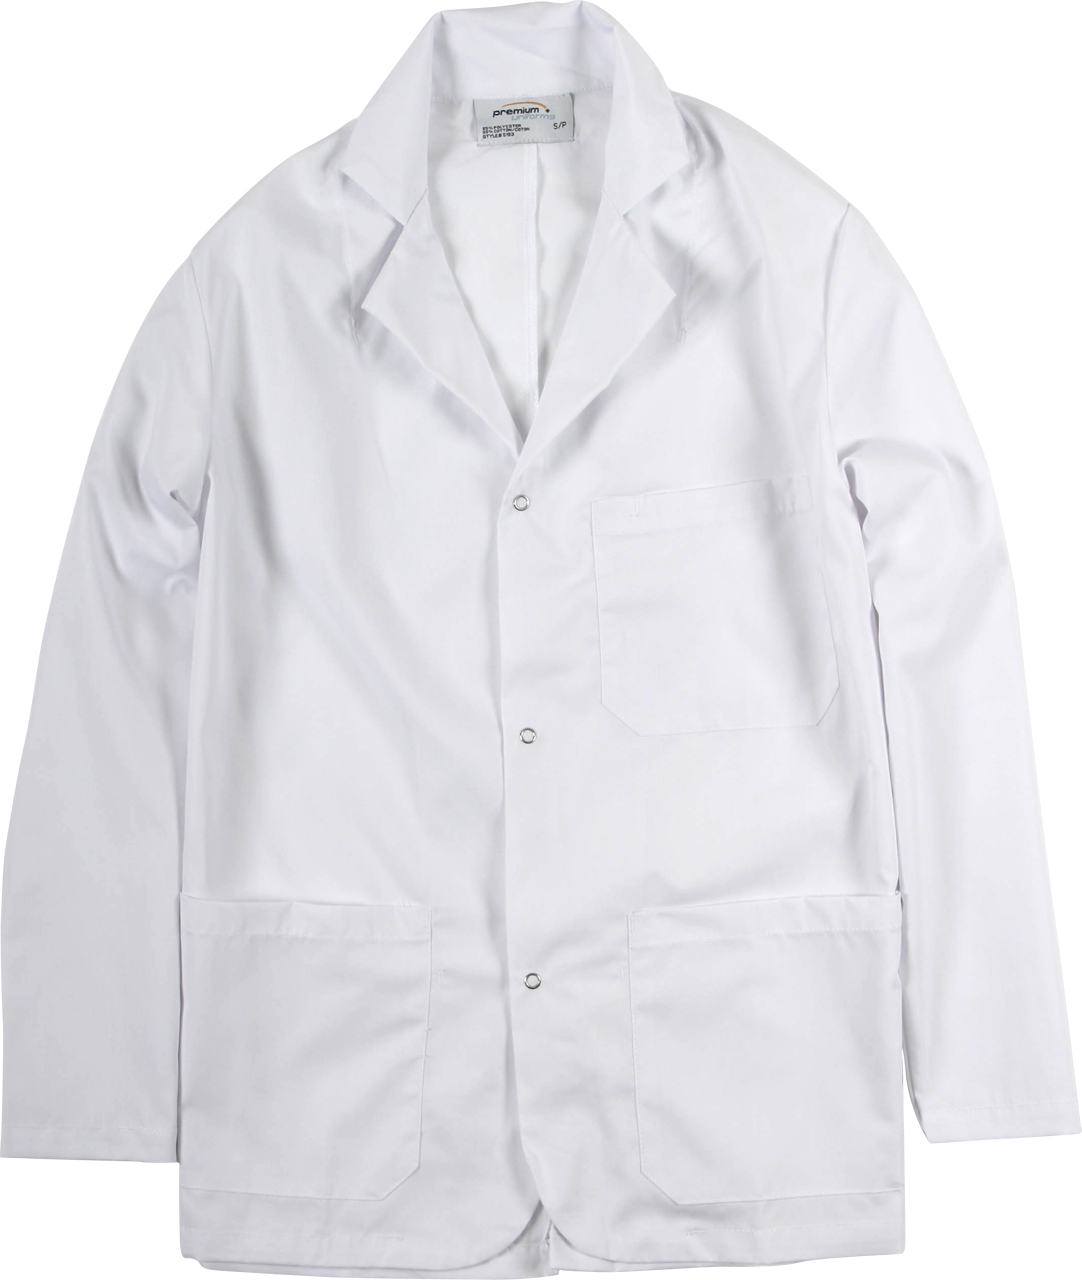 Picture of Premium Uniforms 3 Pocket Poplin Counter Coat With Snaps